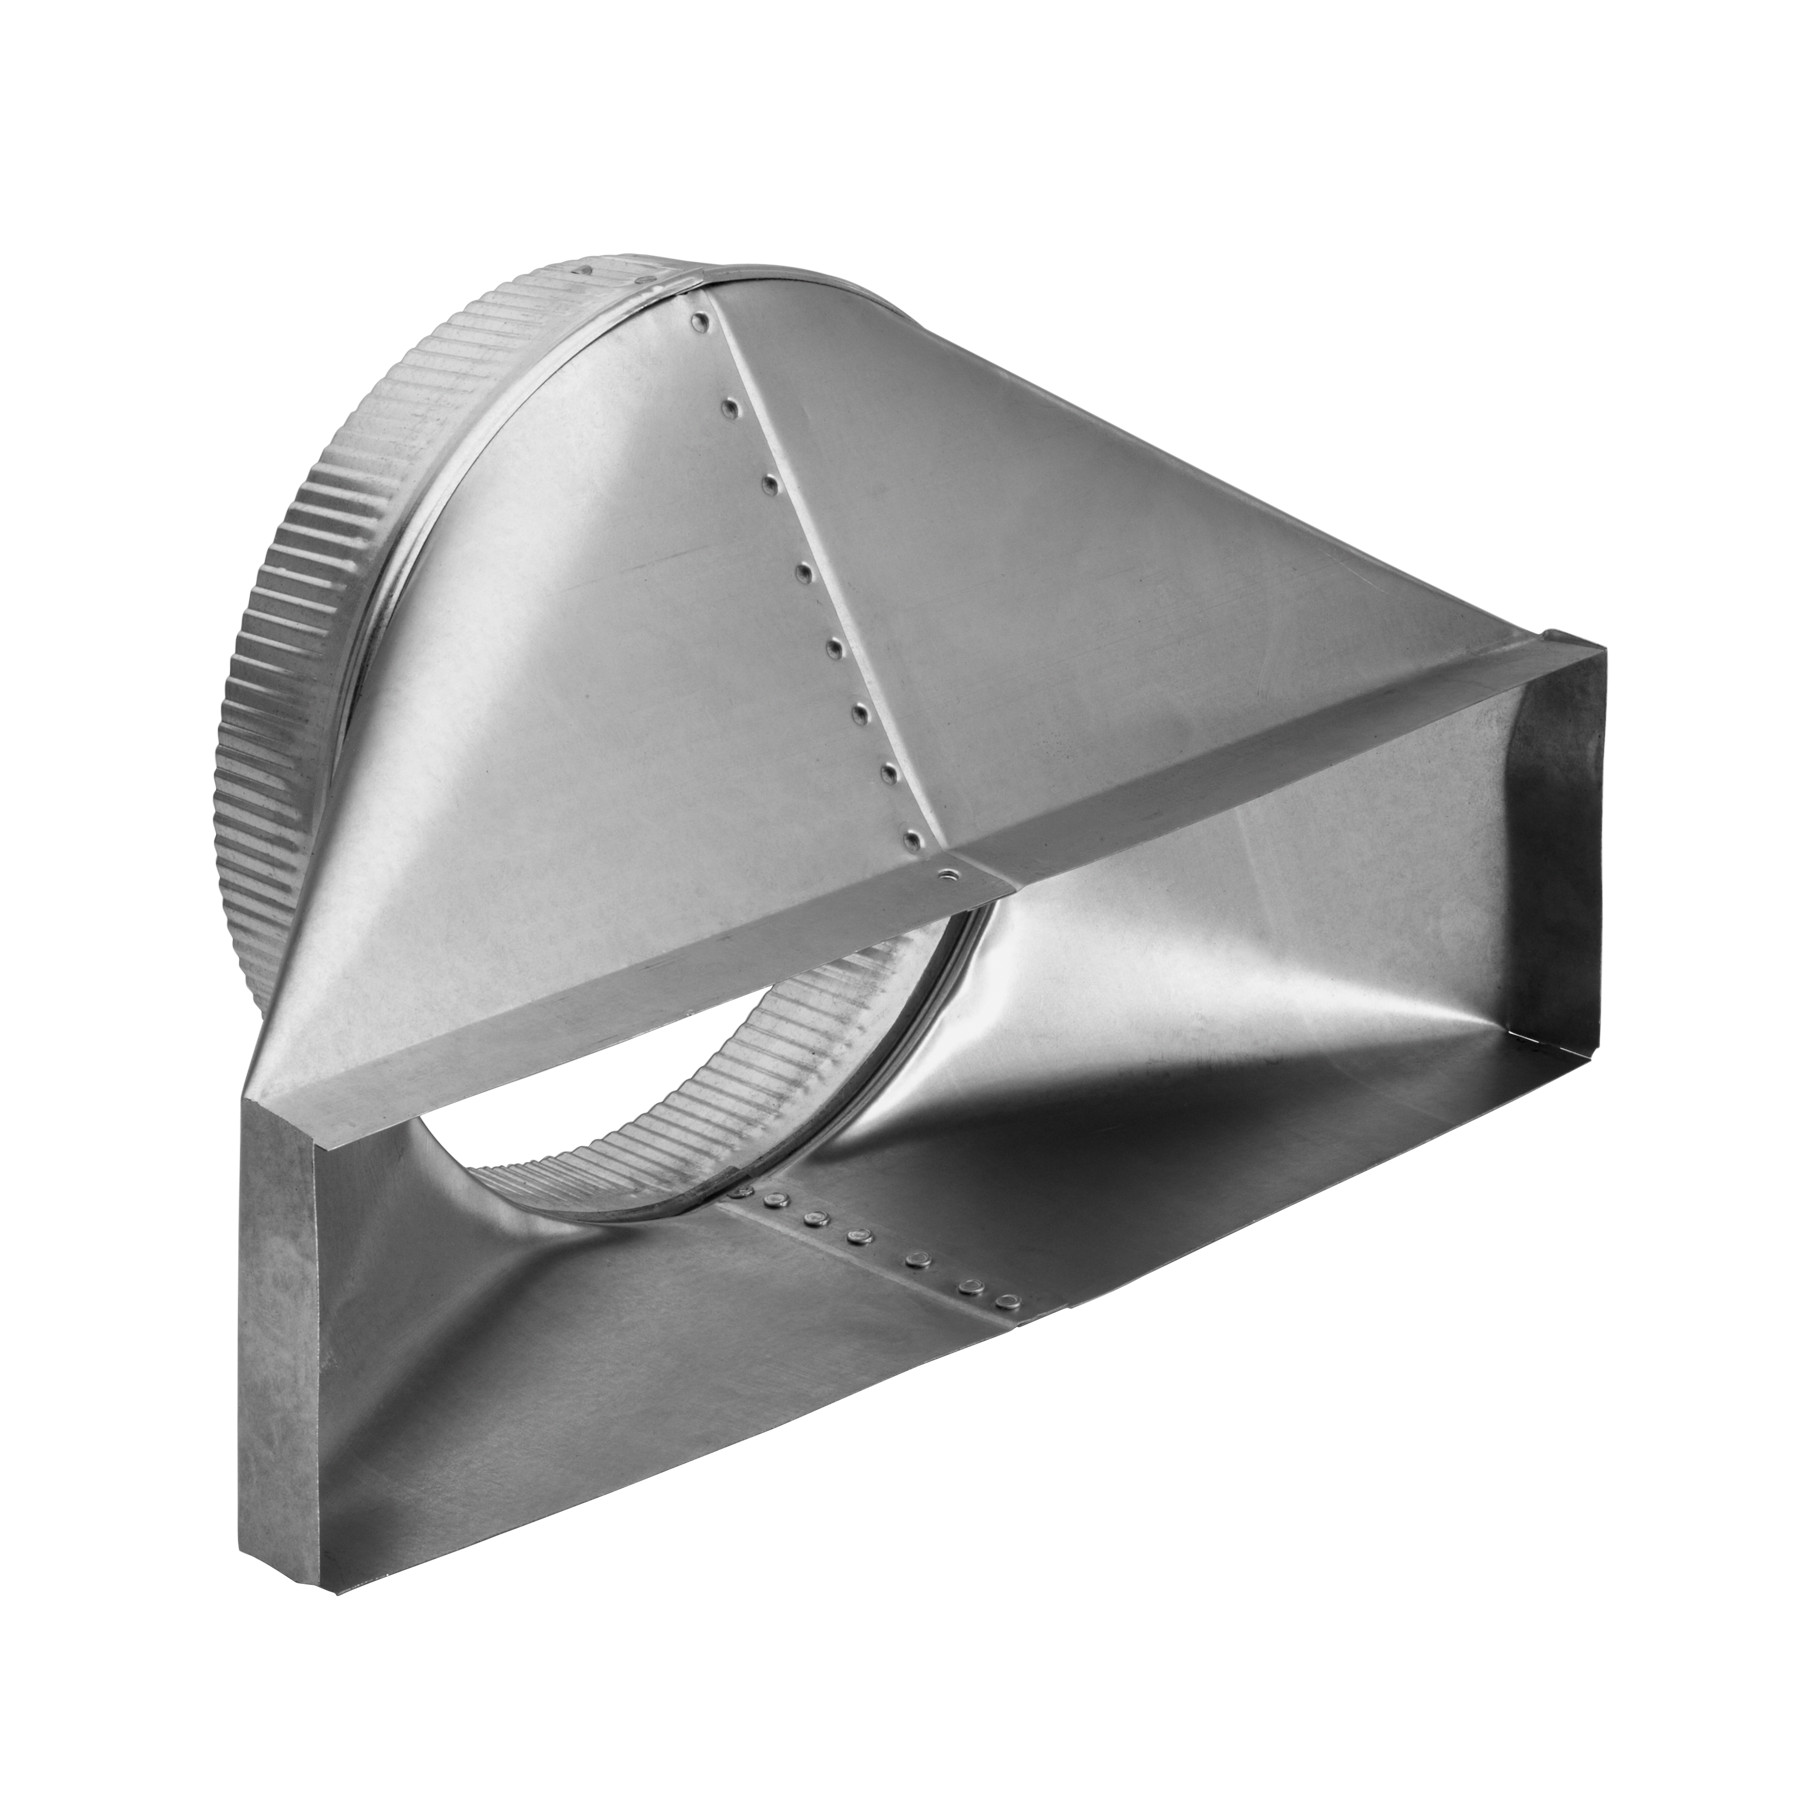 10-Inch Round Horizontal Transition for Range Hoods and Bath Ventilation Fans